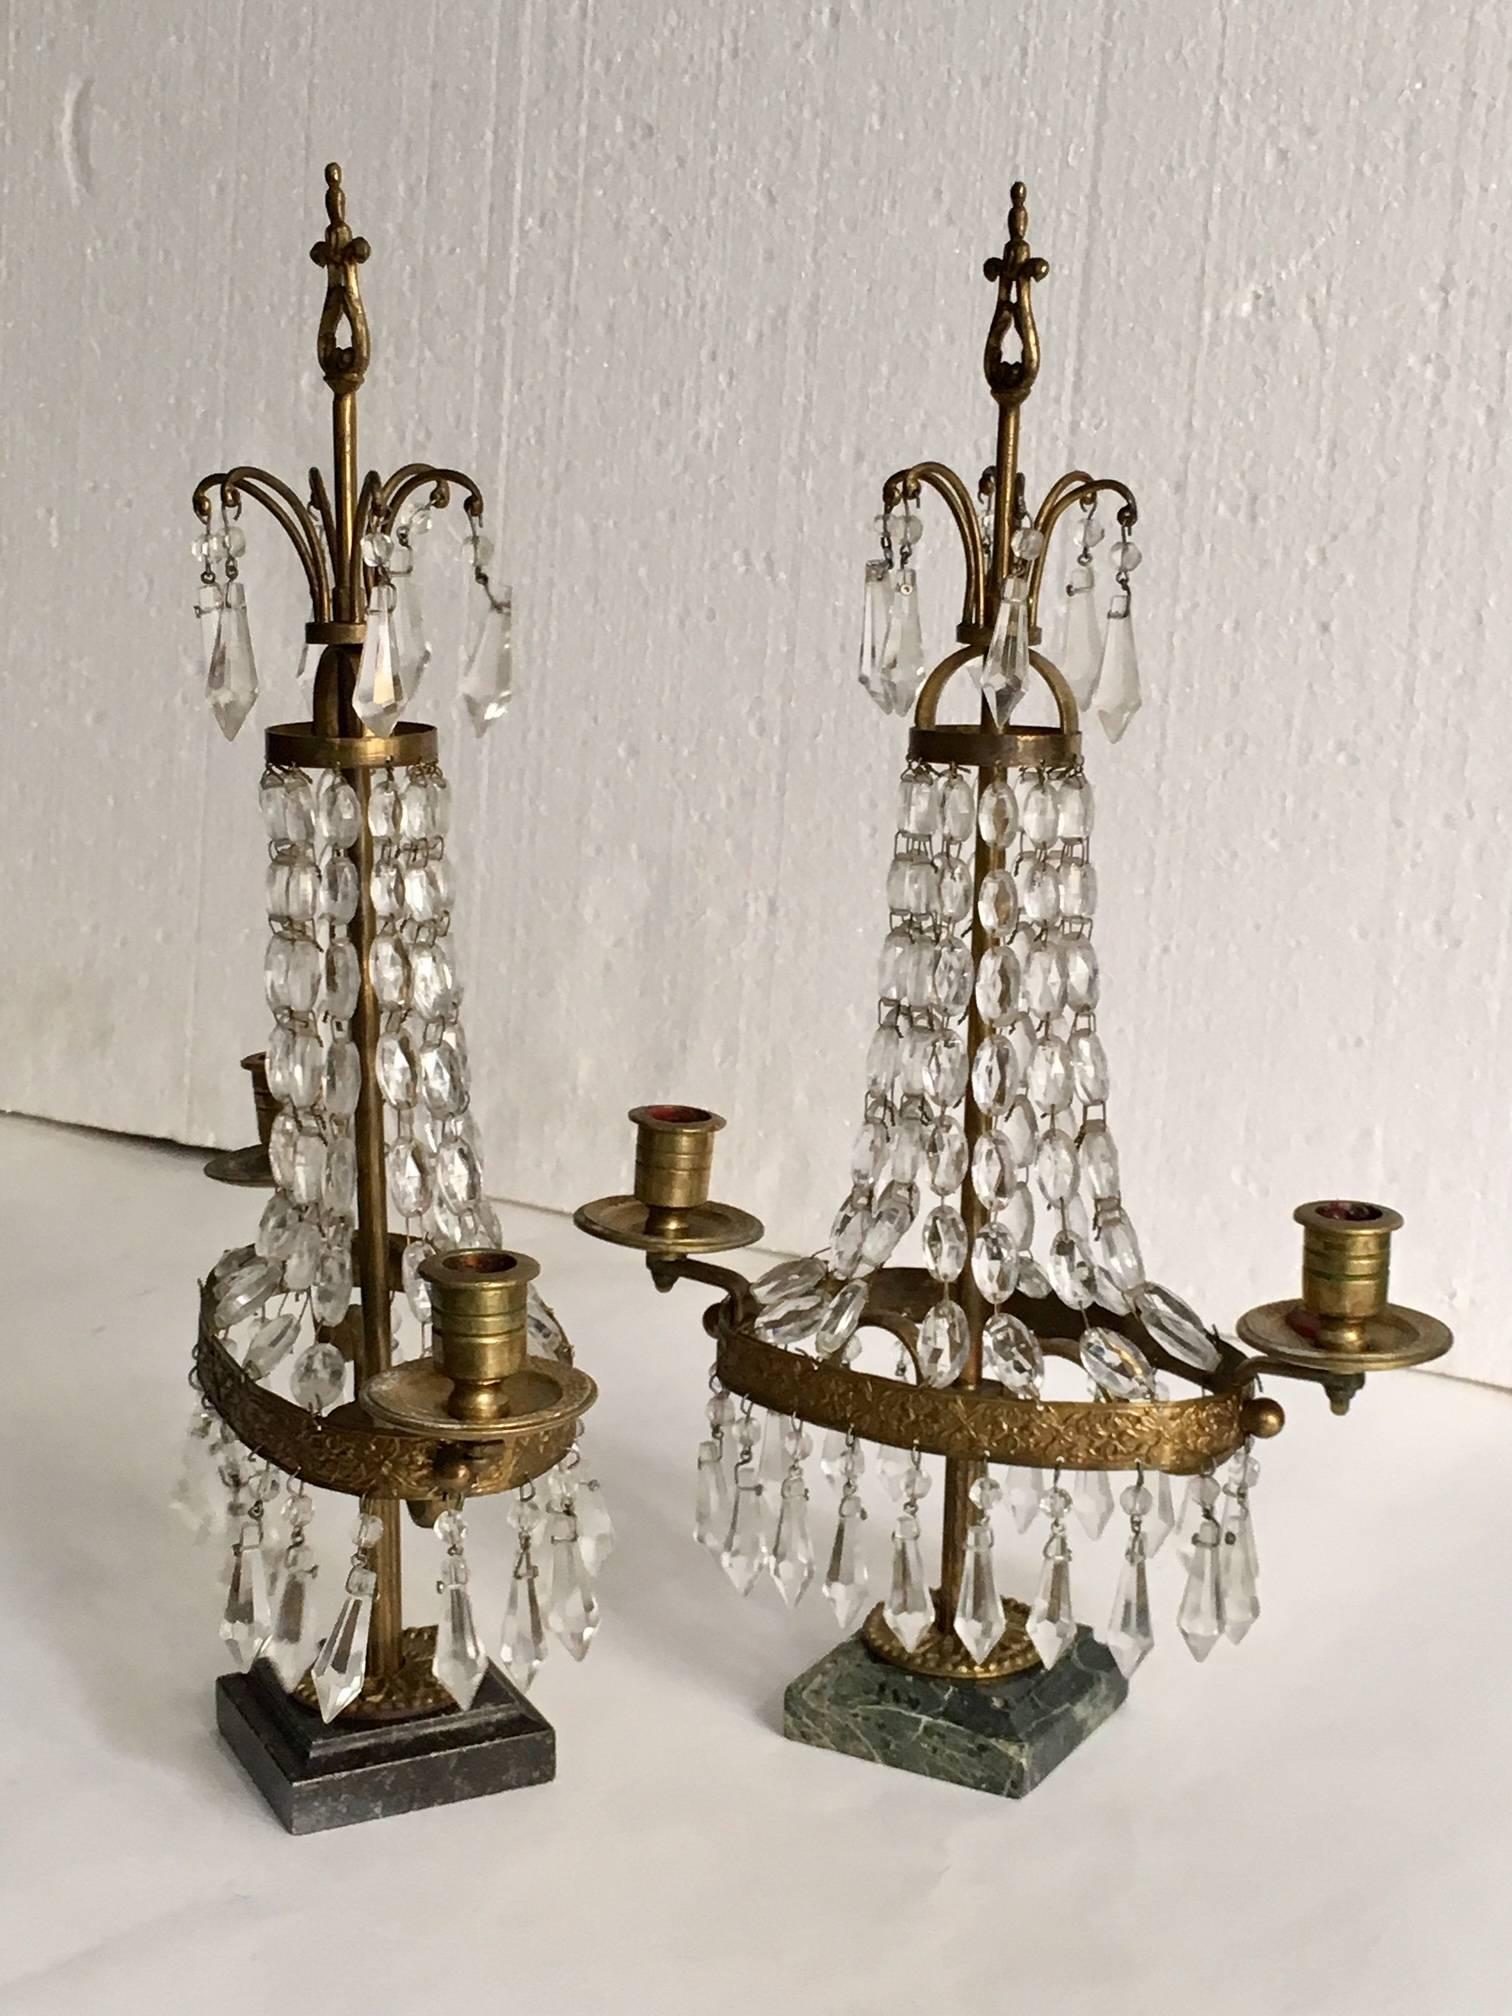 Pair of Swedish brass an crystal candelabra girandols, Louis XVI style on marble bases with cut crystal, each girandoles has two arms, each of which holds a single candle.